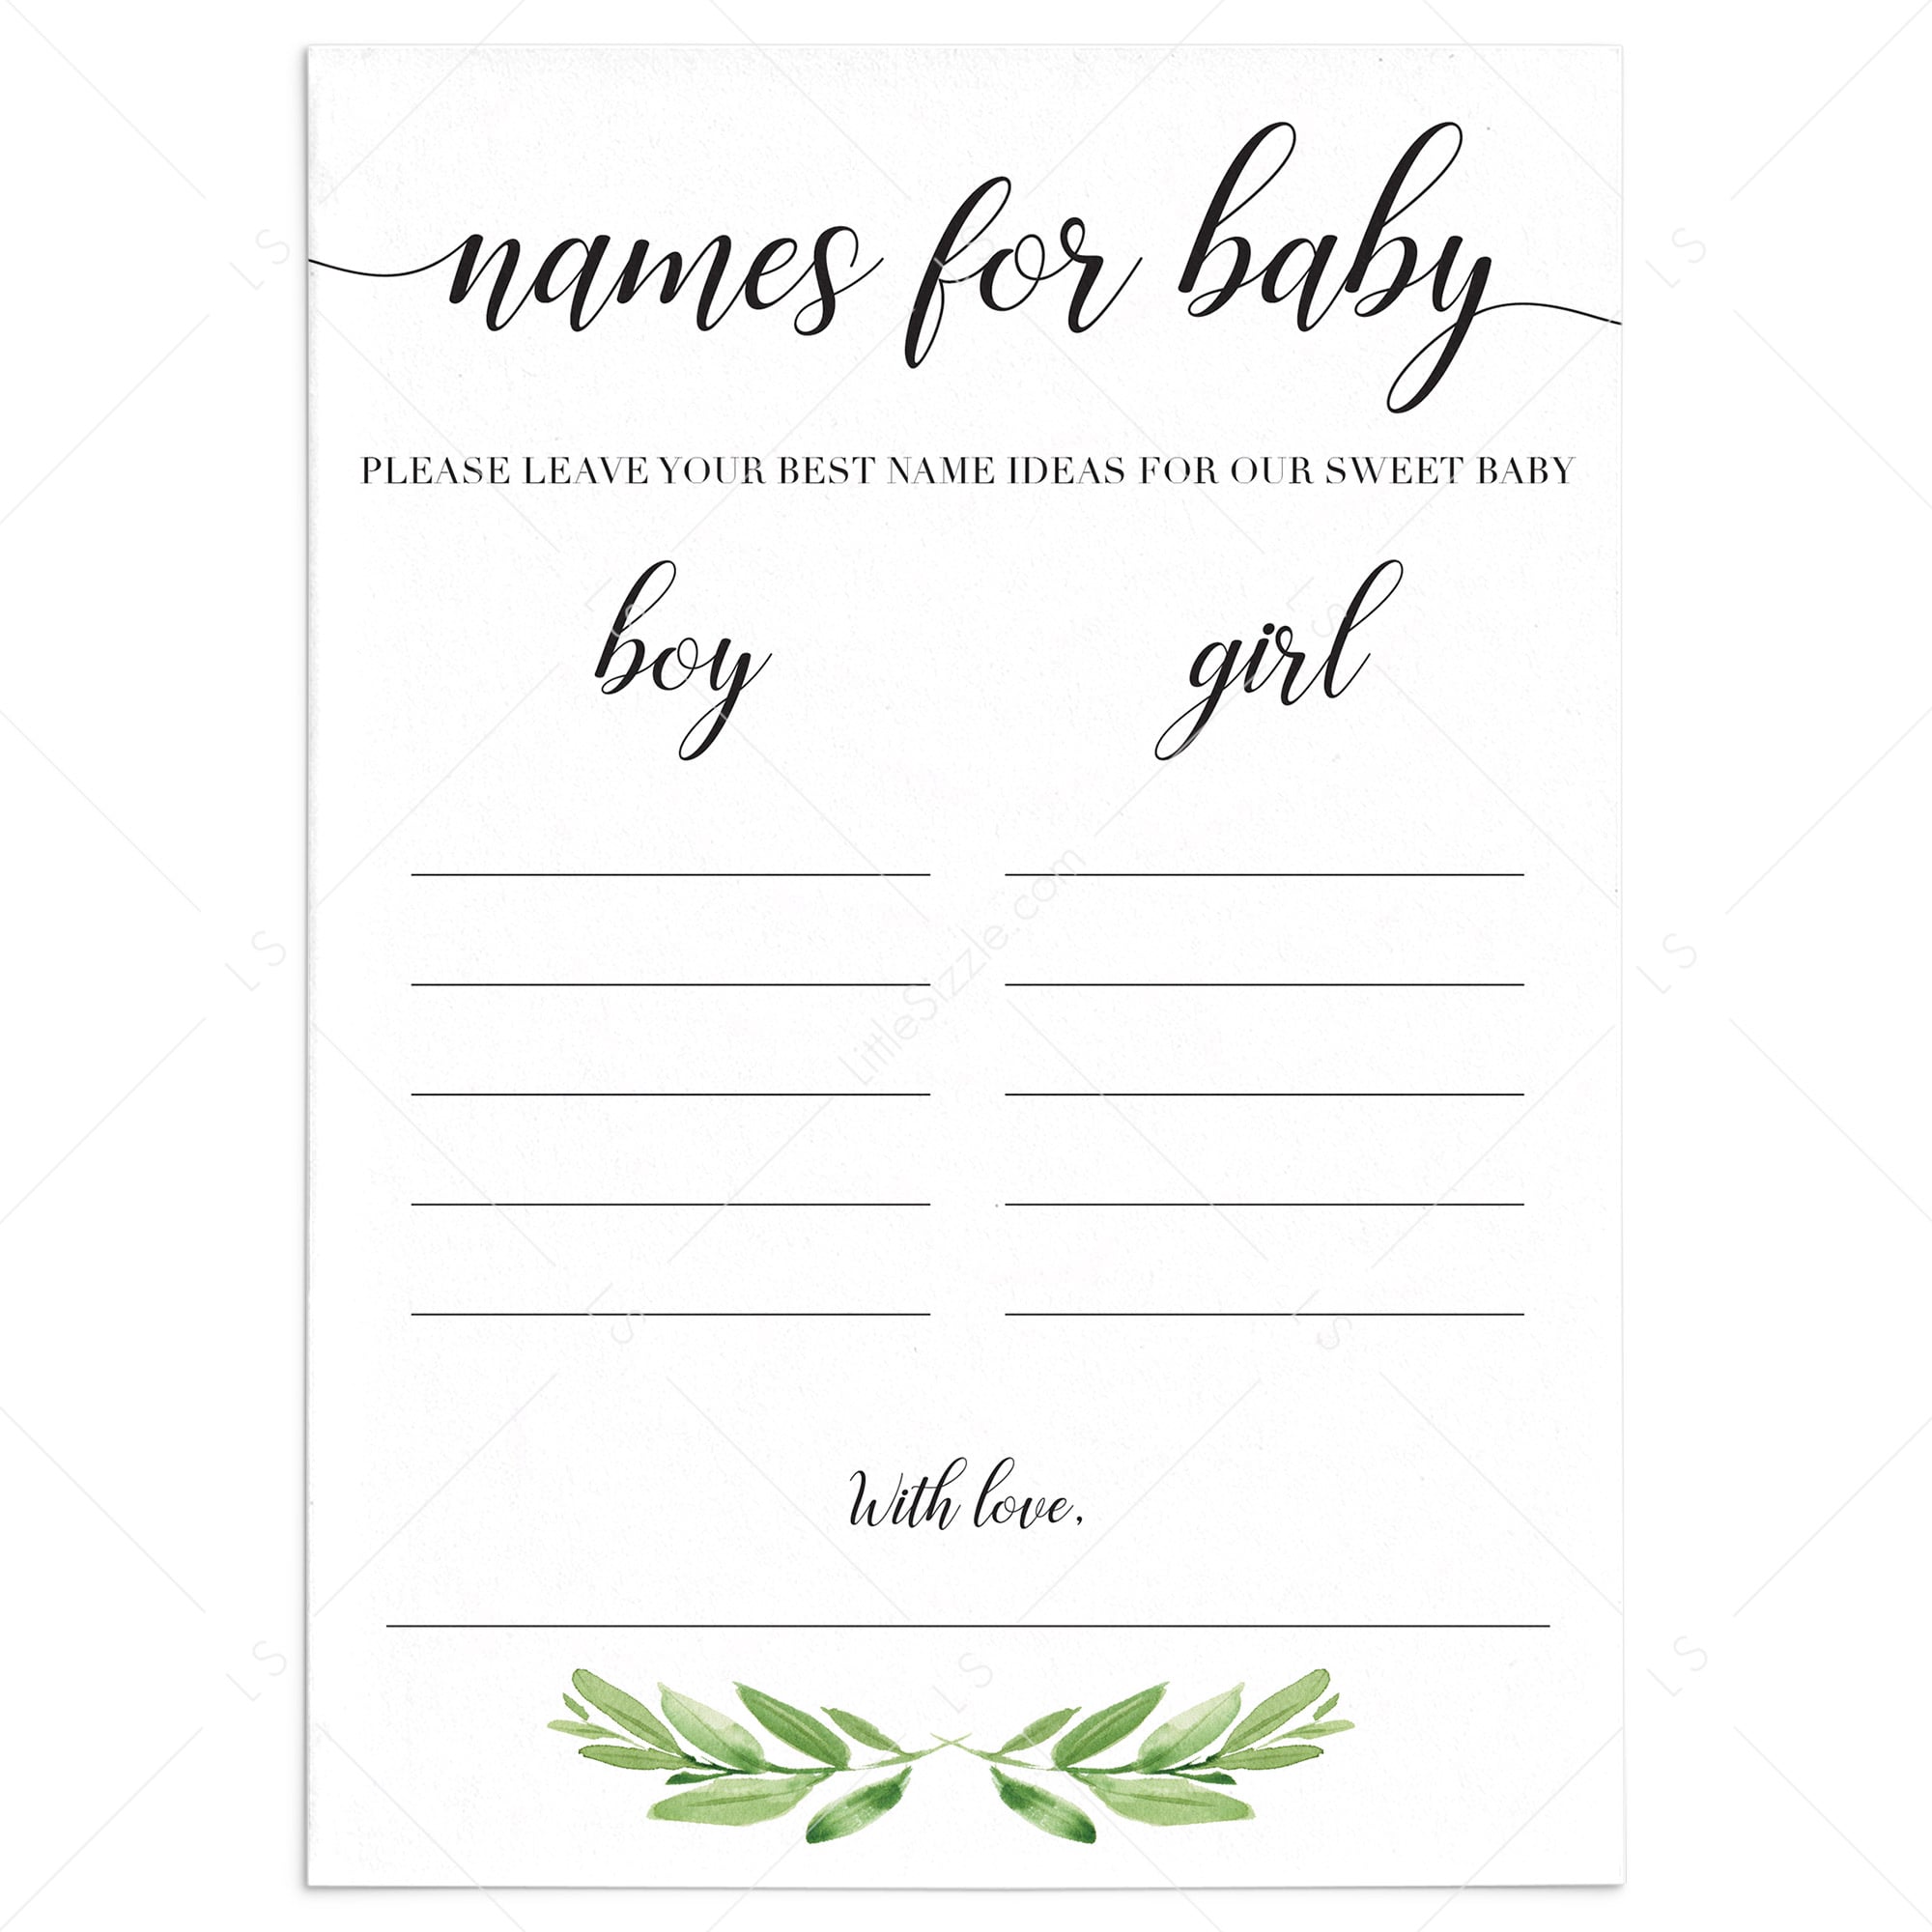 Printable baby name cards for baby shower by LittleSizzle